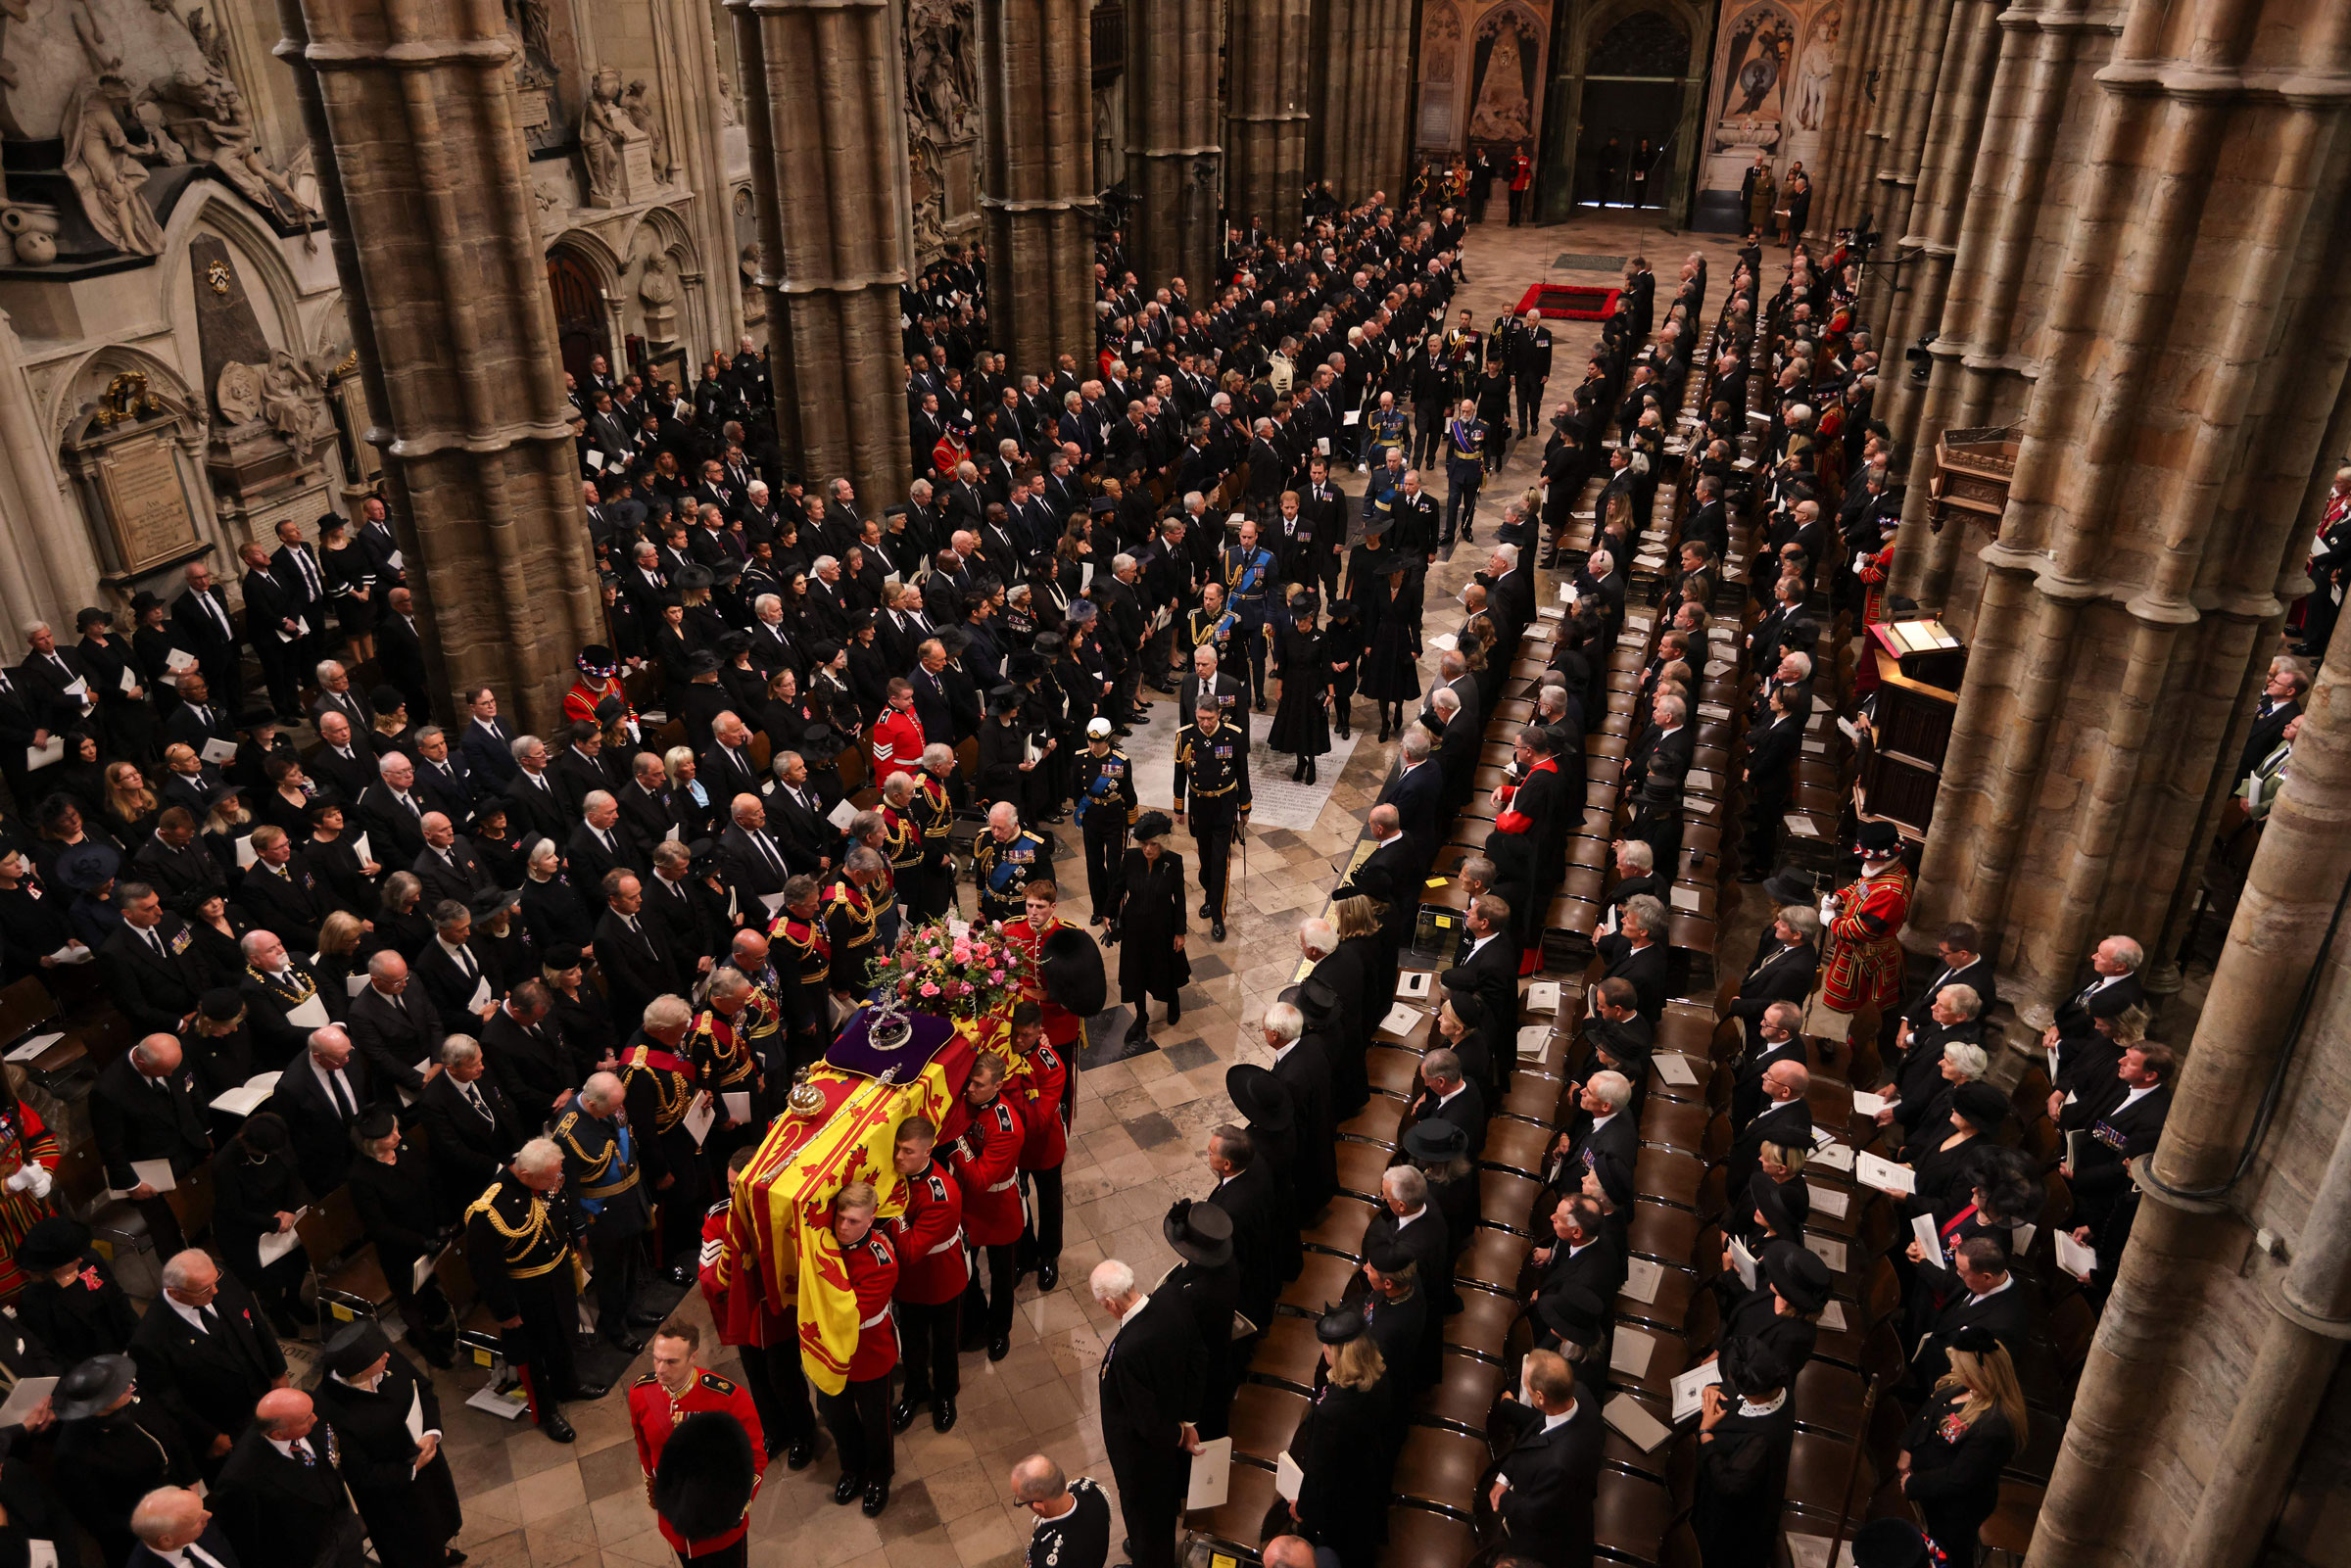 A Bearer Party of The Queen's Company, 1st Battalion Grenadier Guards carries the coffin of Queen Elizabeth II, draped in the Royal Standard, into Westminster Abbey in London on September 19, 2022, ahead of the State Funeral Service.